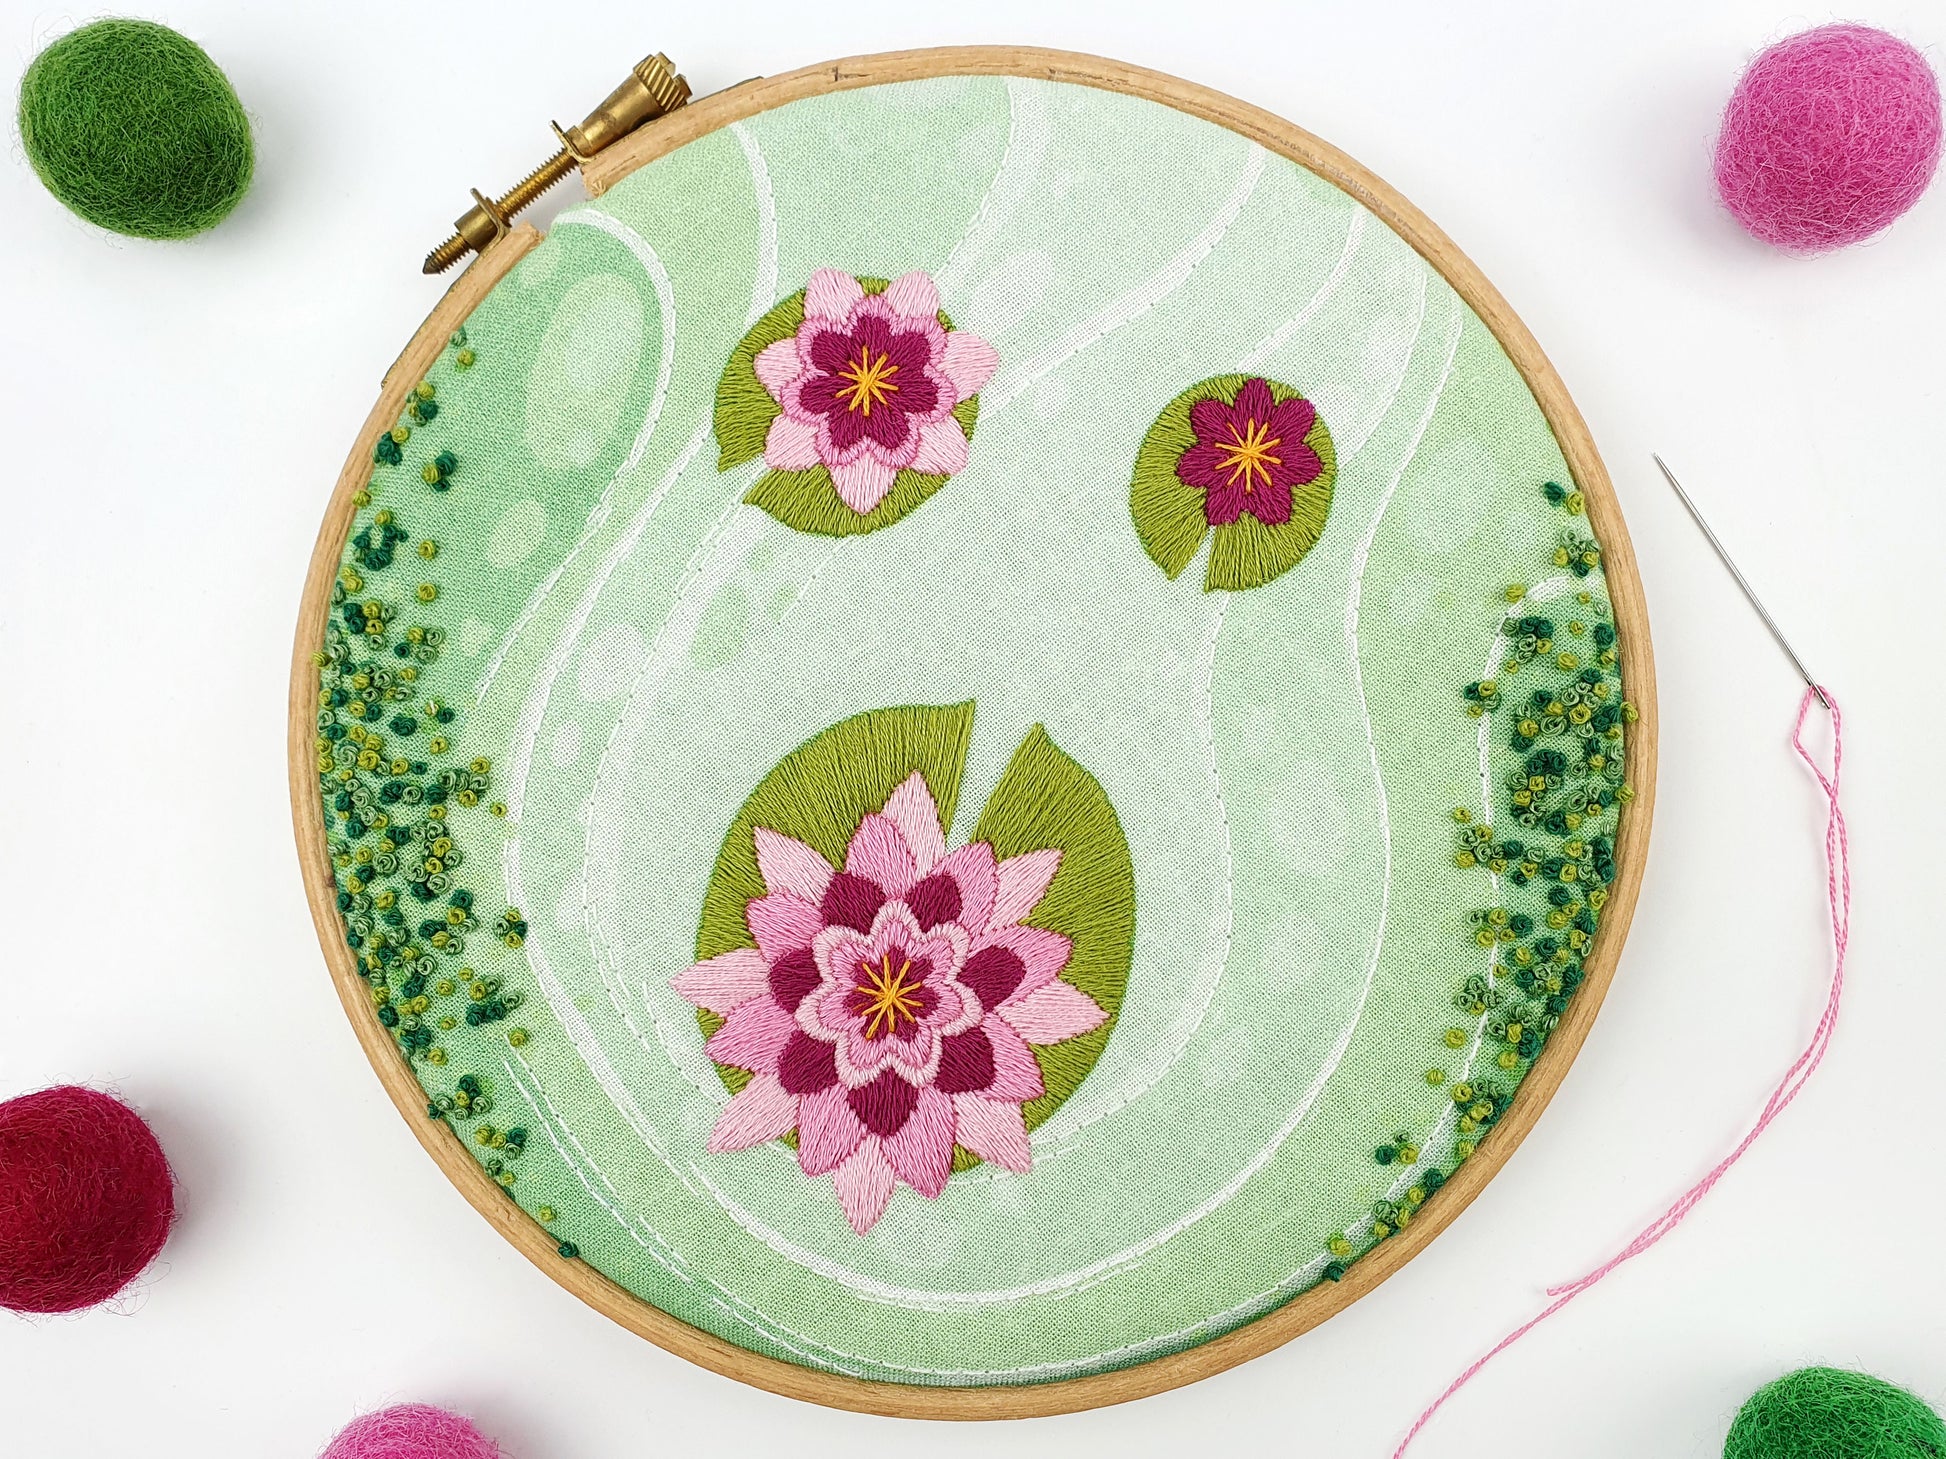 Lily Pad Embroidery Fabric Pattern Pack - Fabric Packs - ohsewbootiful